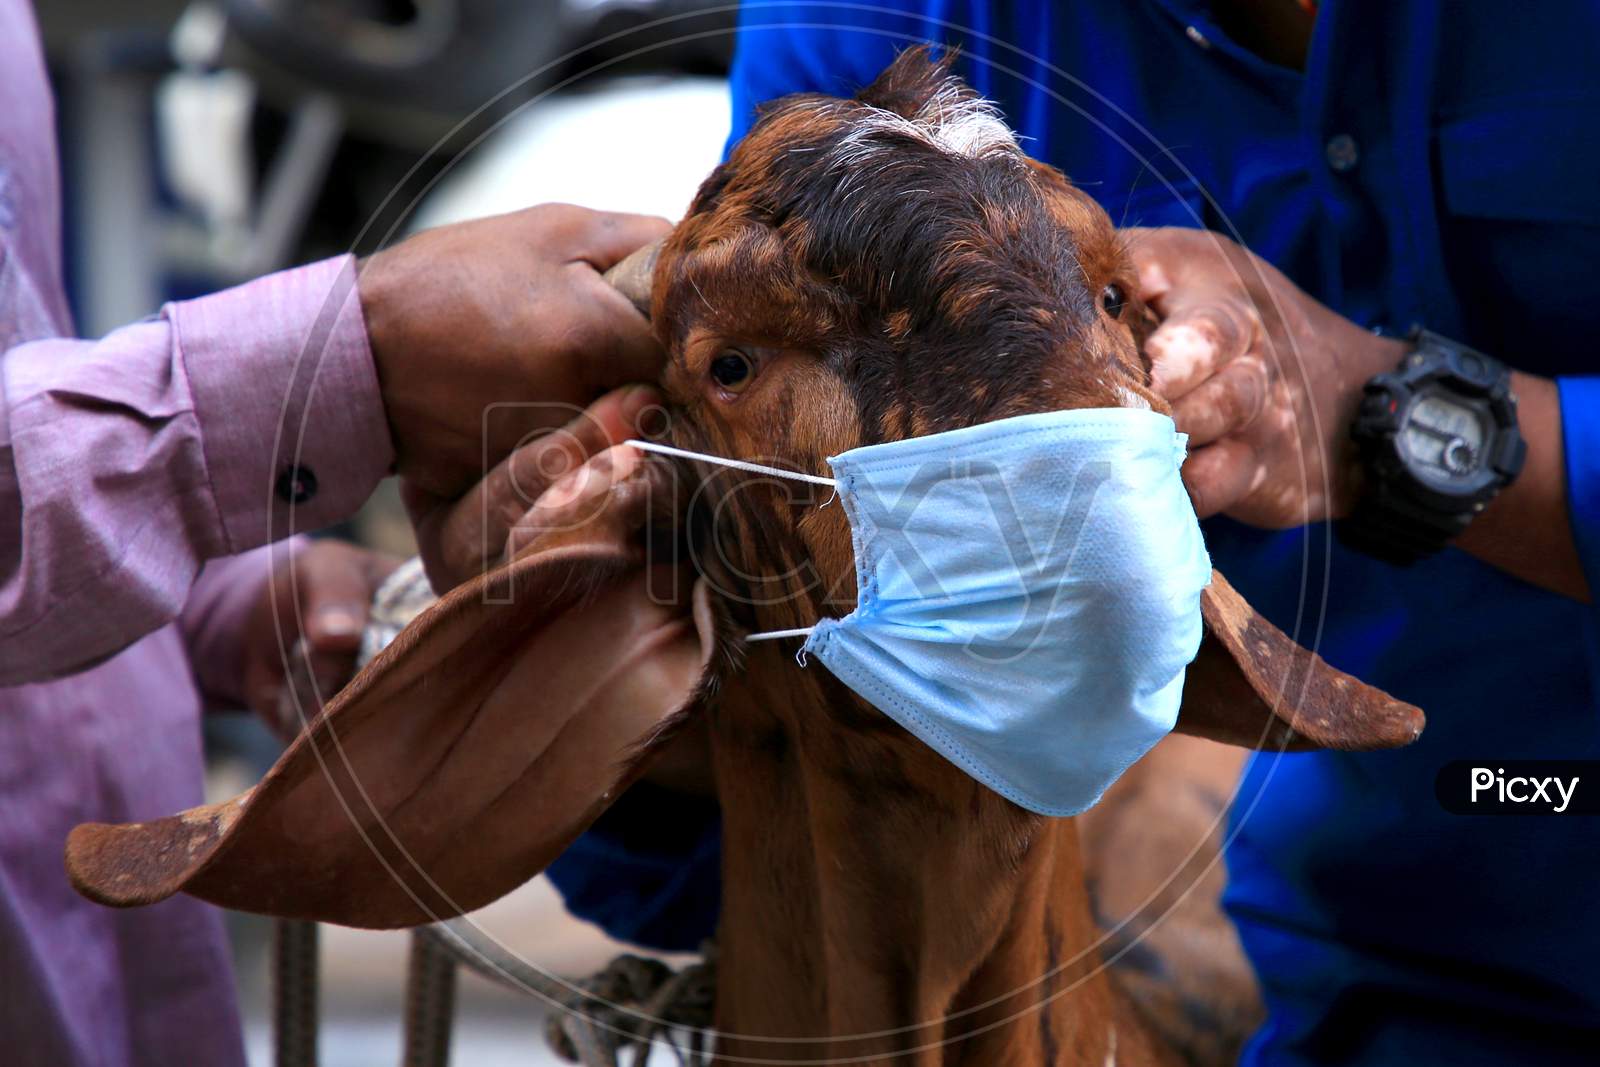 A Man Holds A Face Mask Against The Face Of A Goat During  Eid Al-Adha, The Feast Of Sacrifice Outside The Shrine Of Sufi Saint Khwaja Moinuddin Chishti In Ajmer, On August 1, 2020.